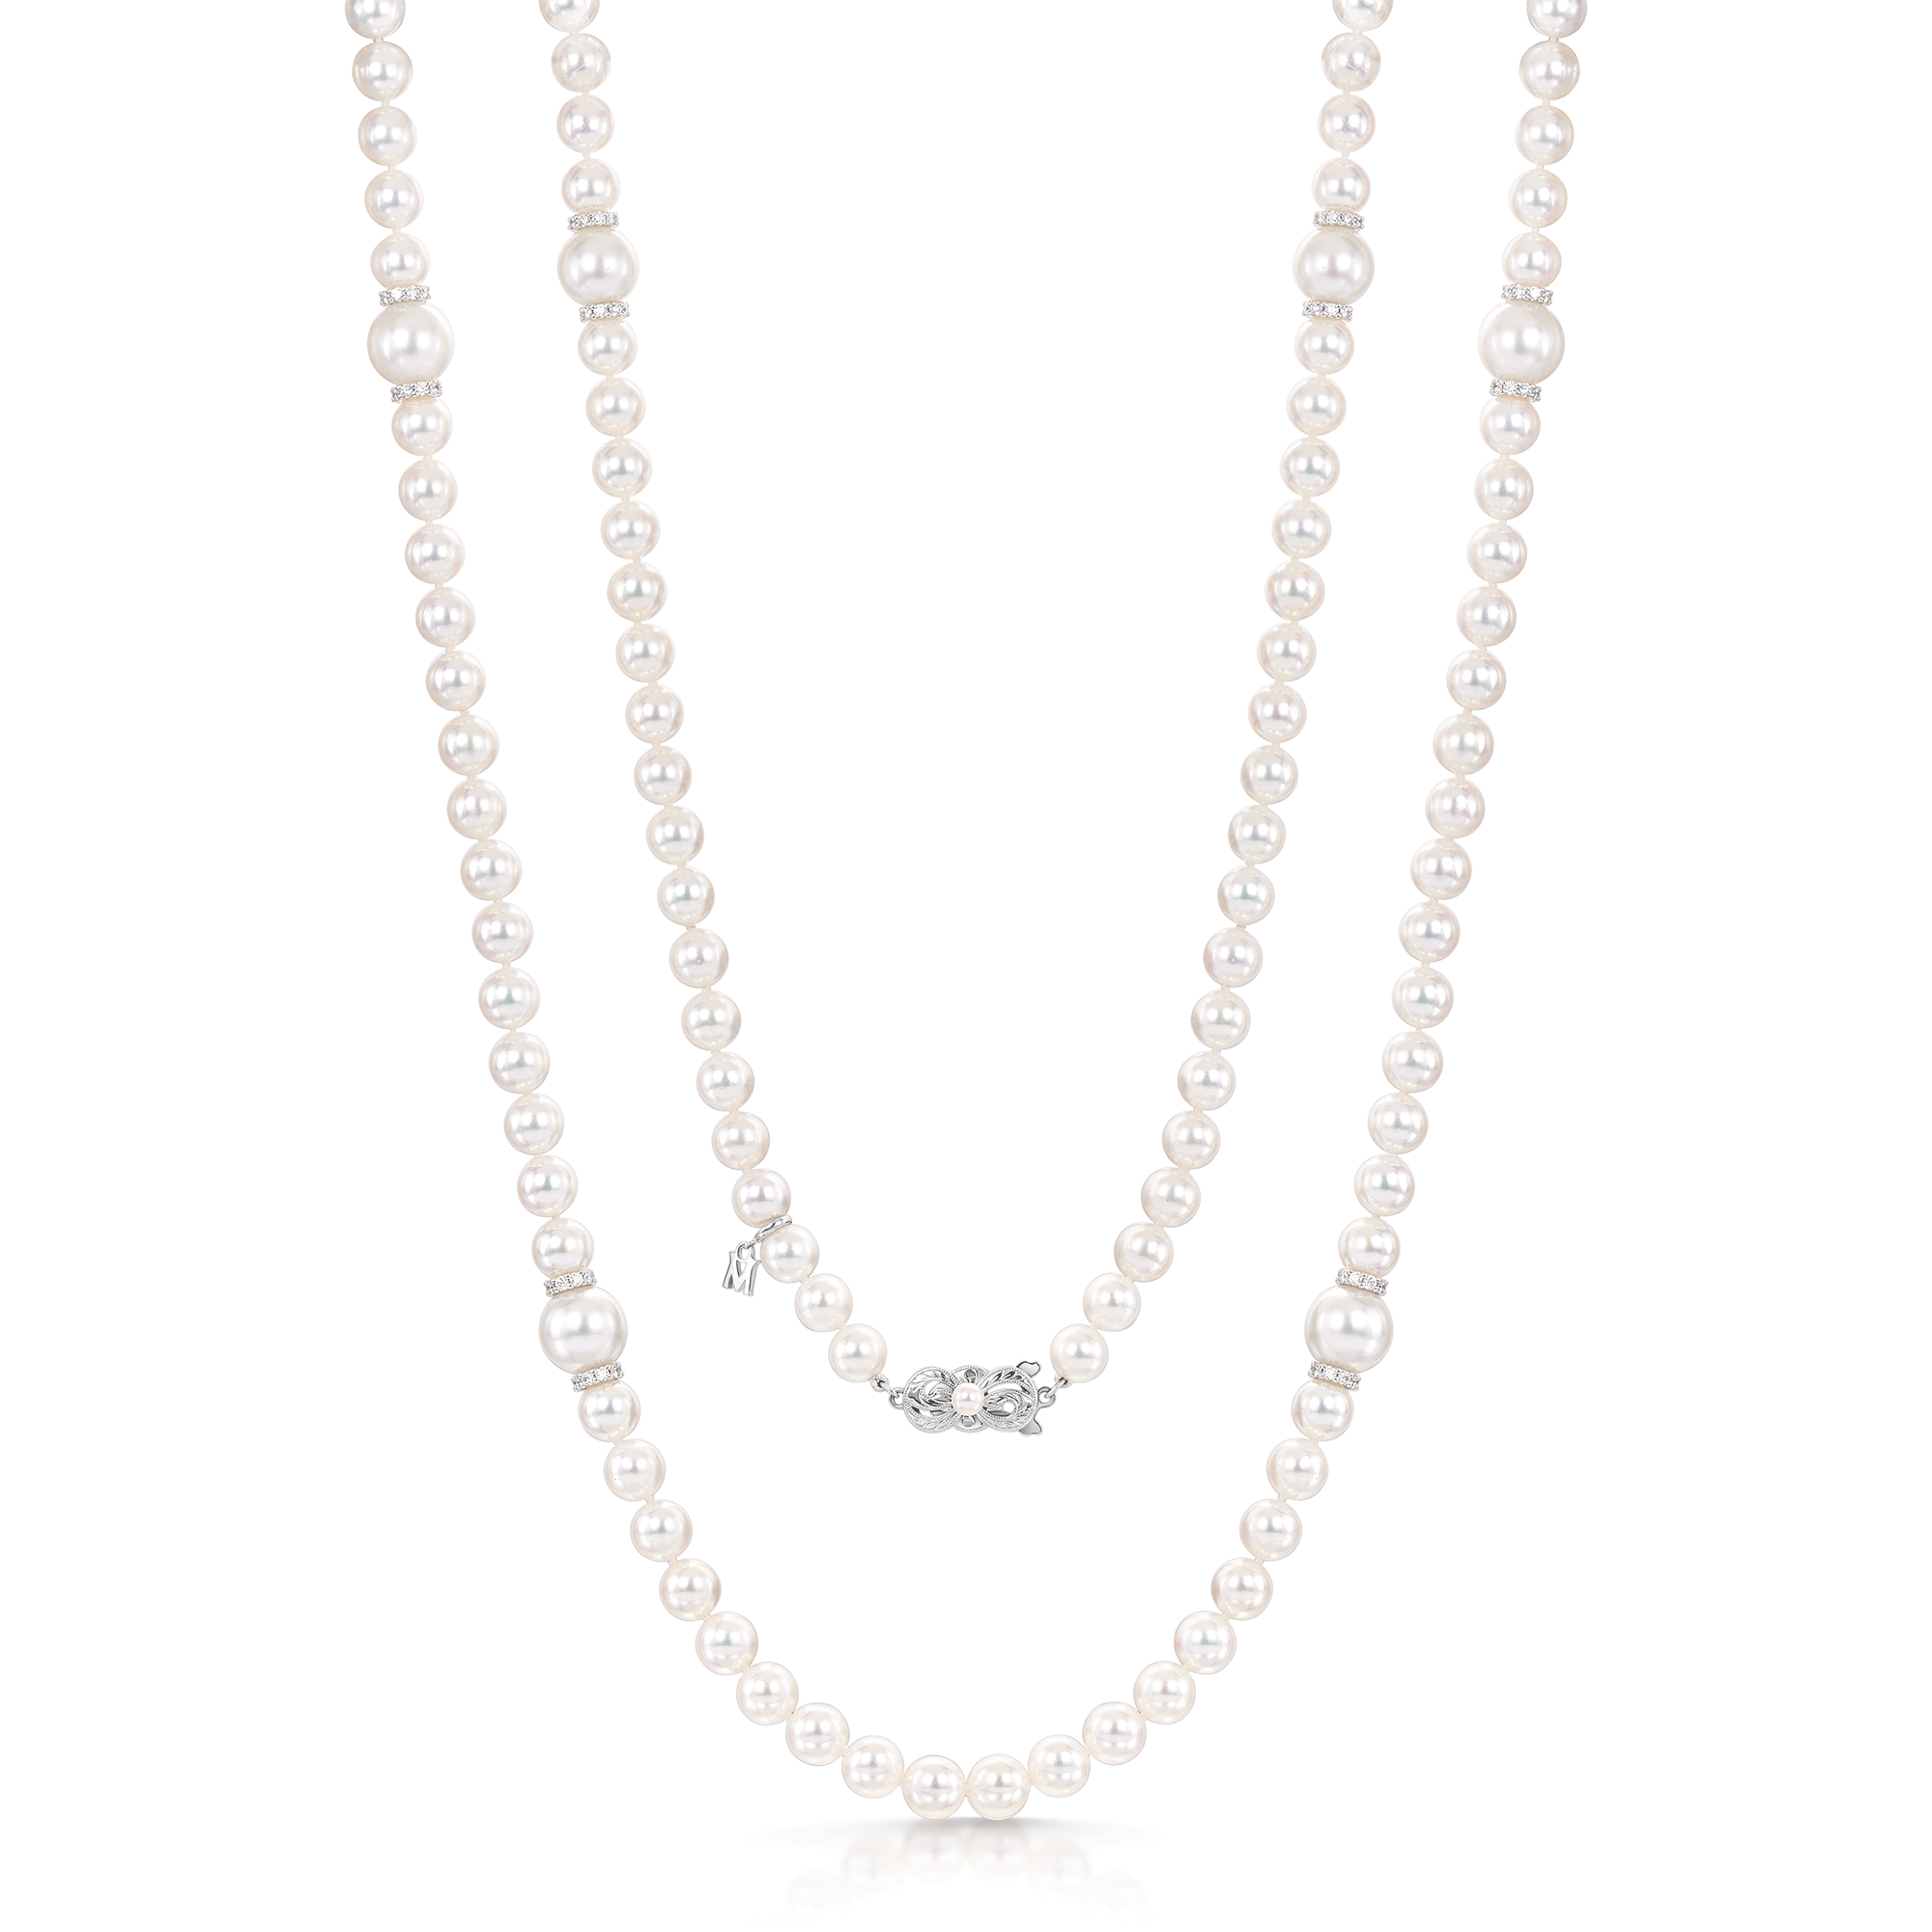 18ct White Gold Akoya Cultured Pearl Sautoir Necklet With Six South Sea Cultured Pearls And Diamond Rondels